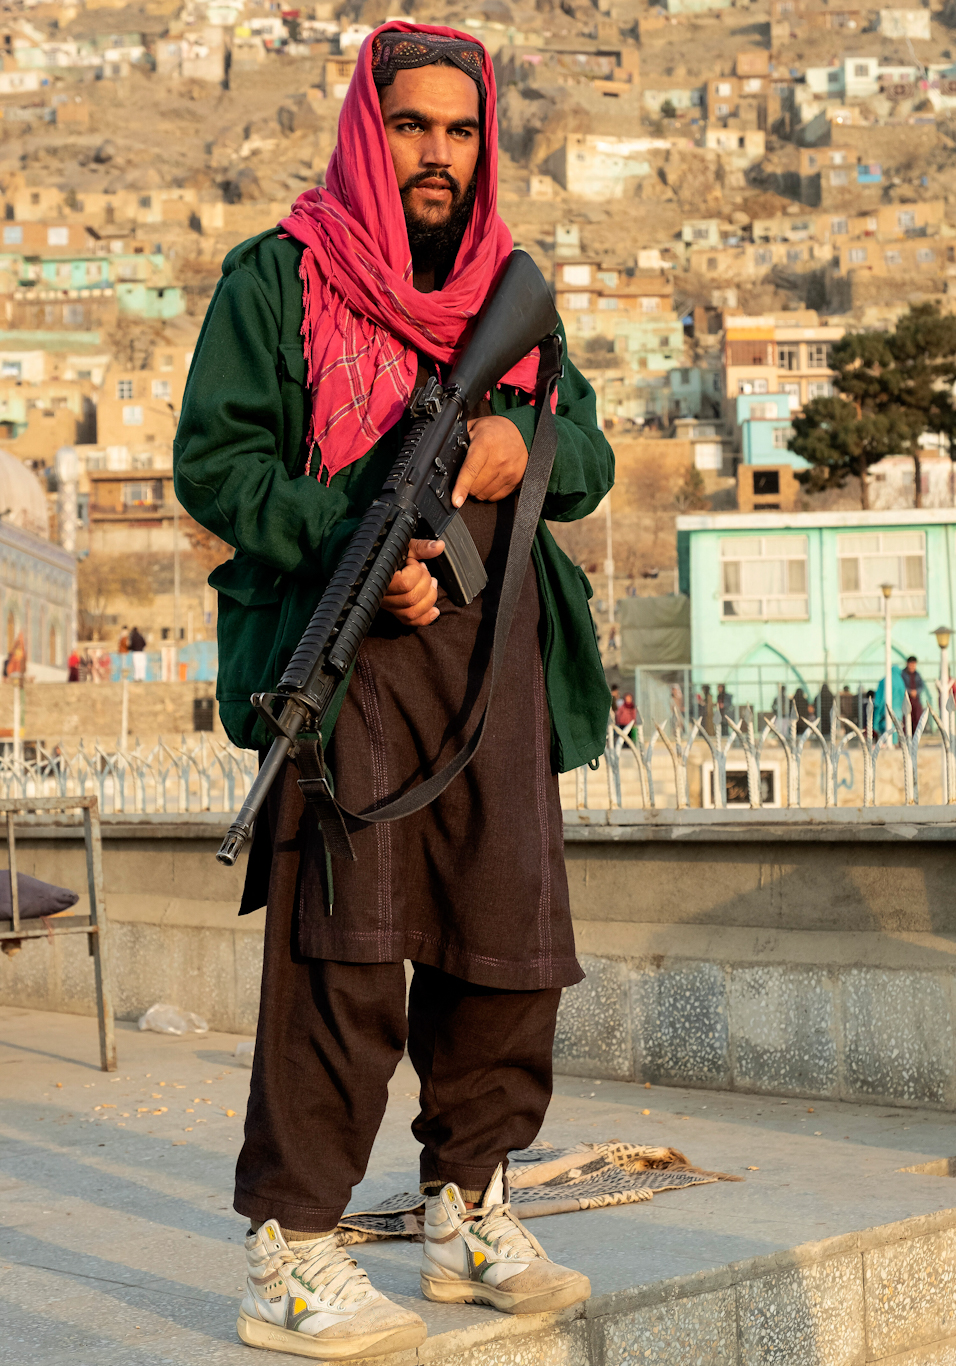 Portraits Of Taliban Fighters - Afghanistan